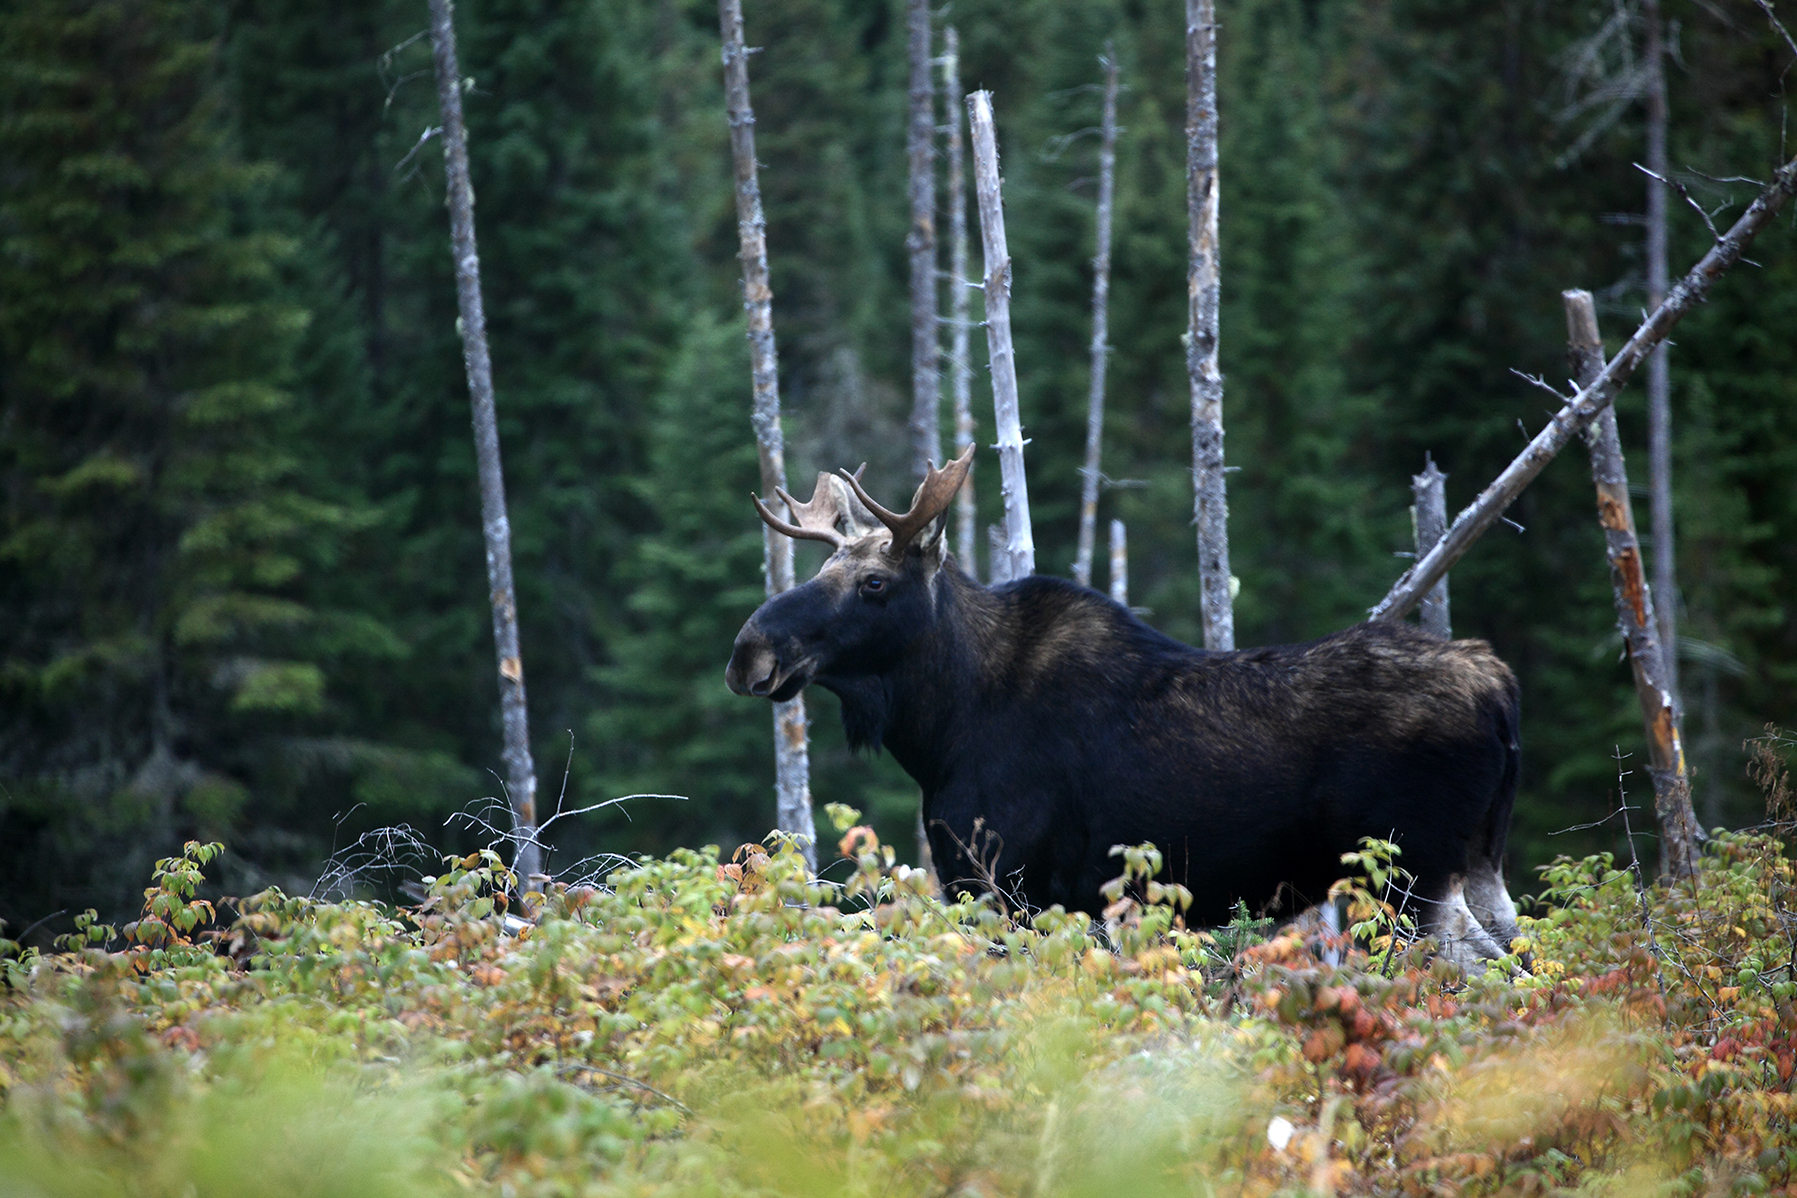 A moose spotted in Forêt Montmorency. Image by Bruce Yuanyue Bi / Lonely Planet Images / Getty